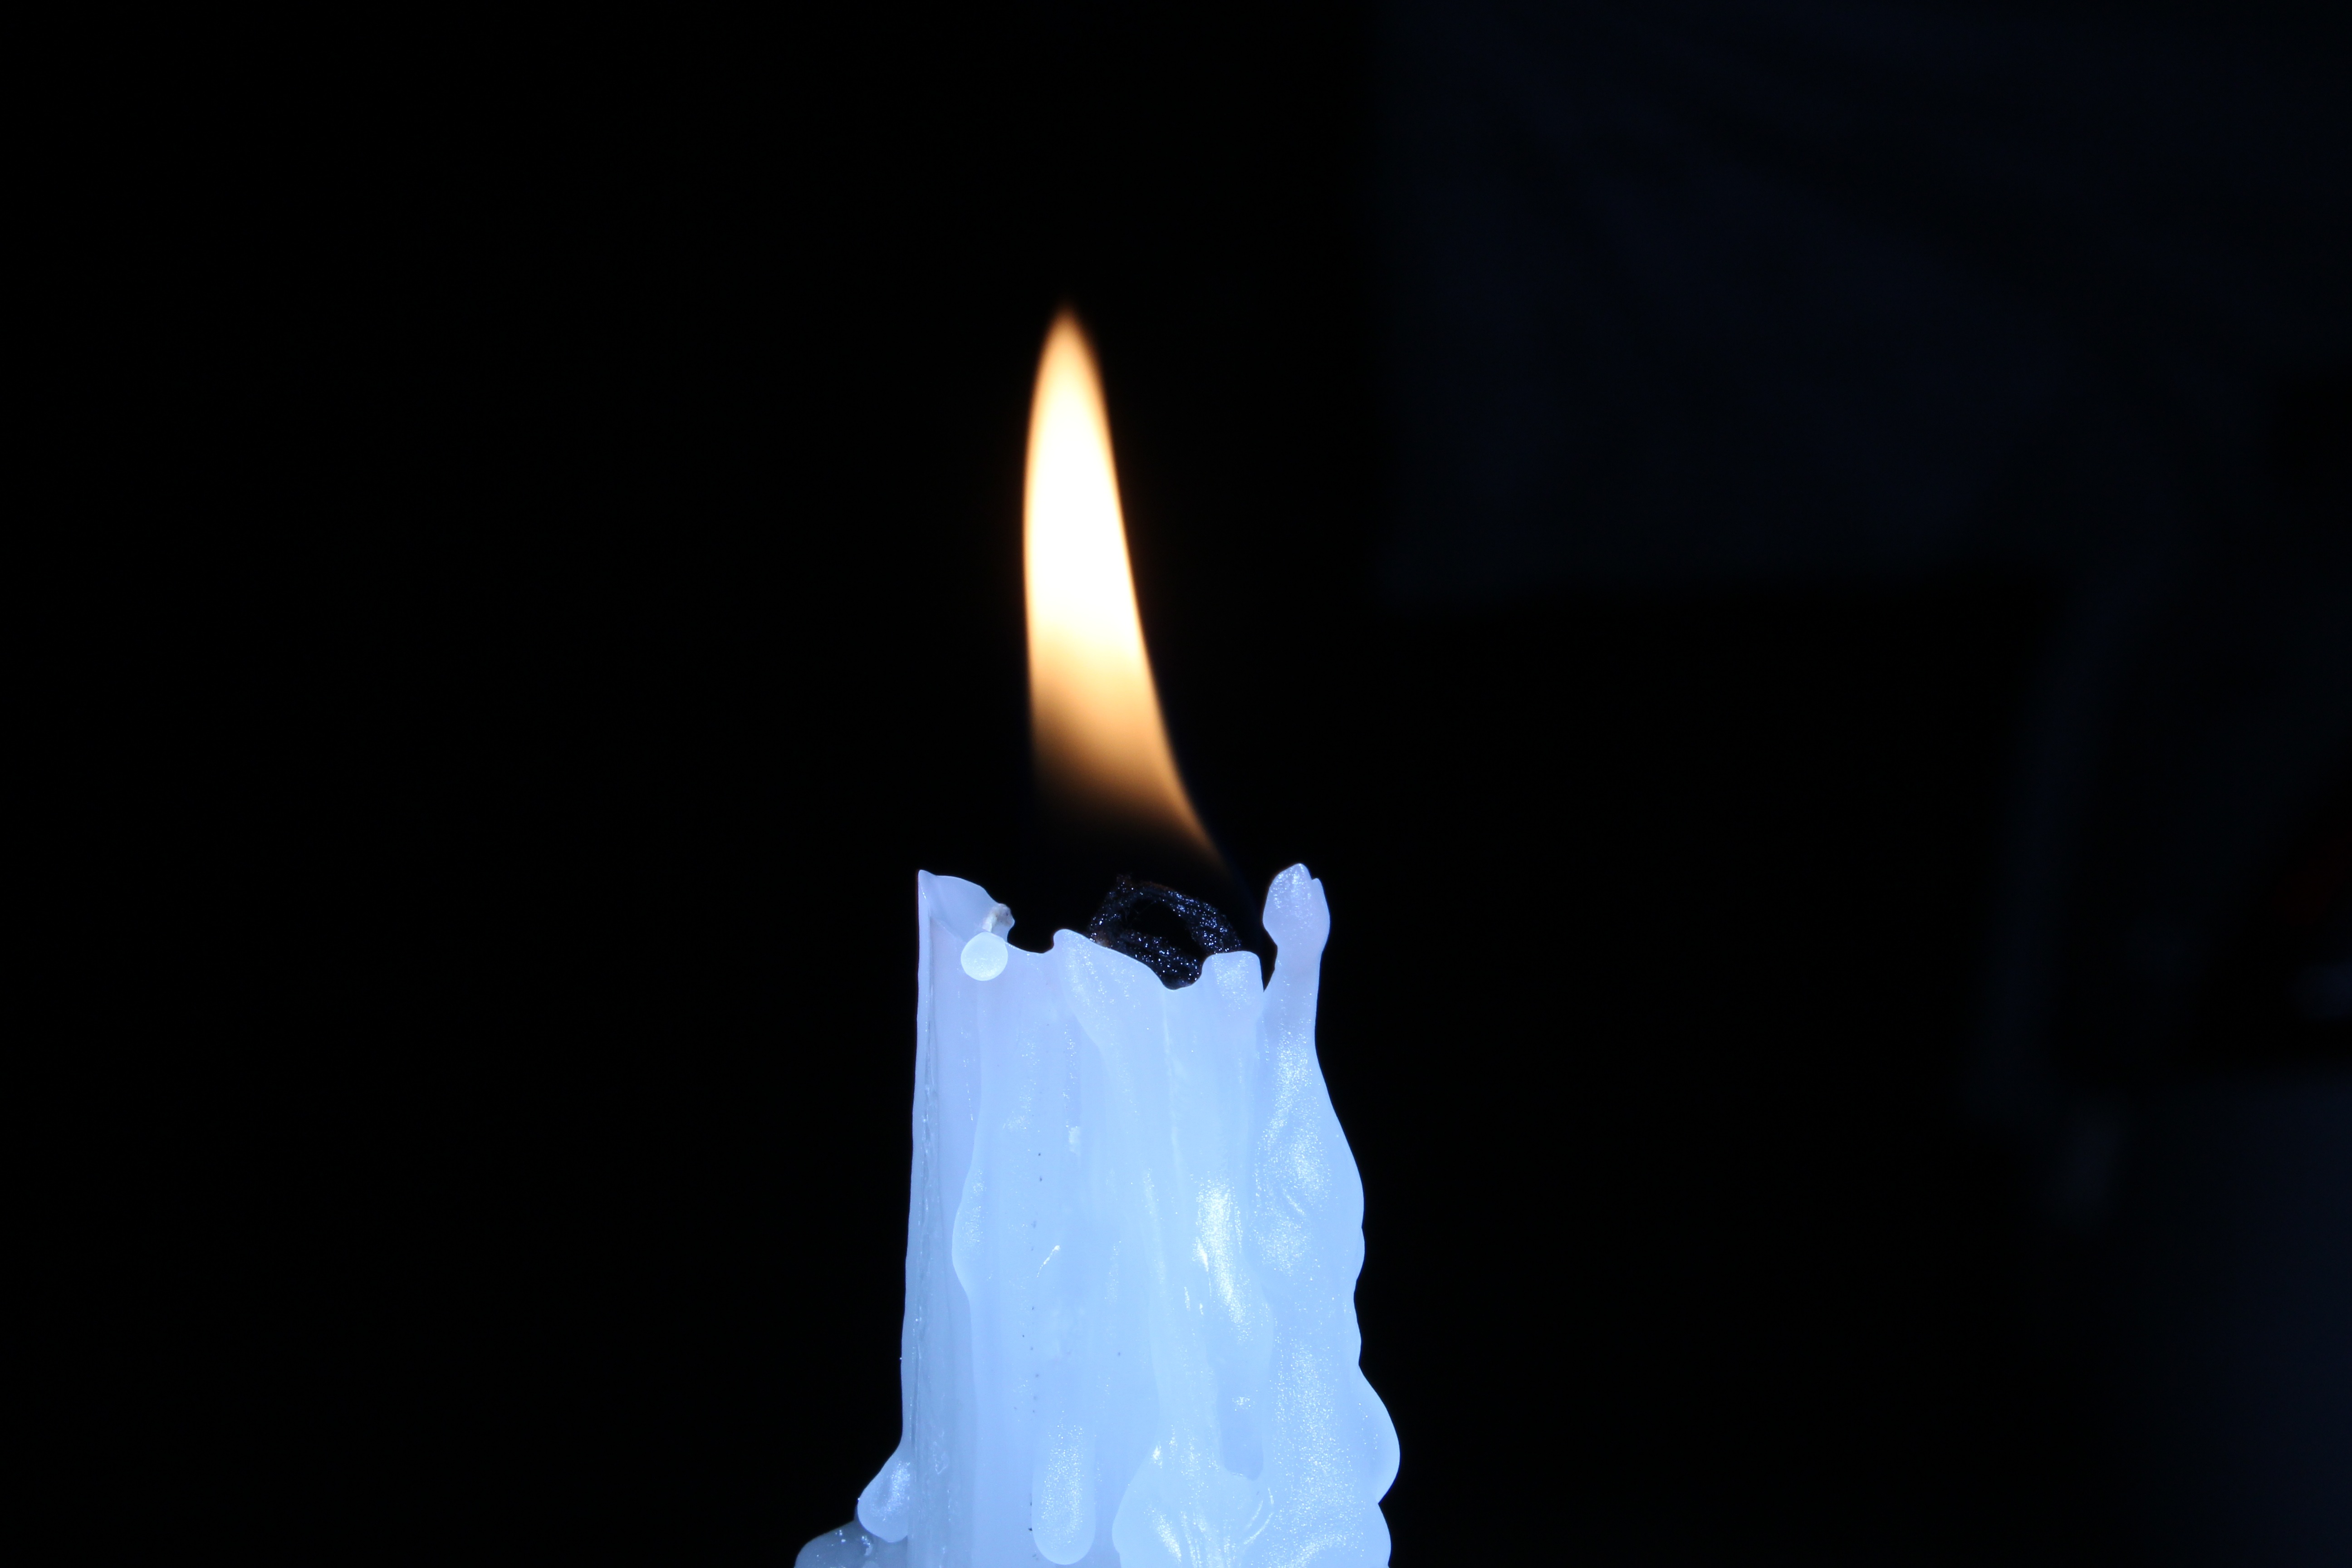 wax, miscellanea, to burn, fire, white, miscellaneous, candle, burn High Definition image